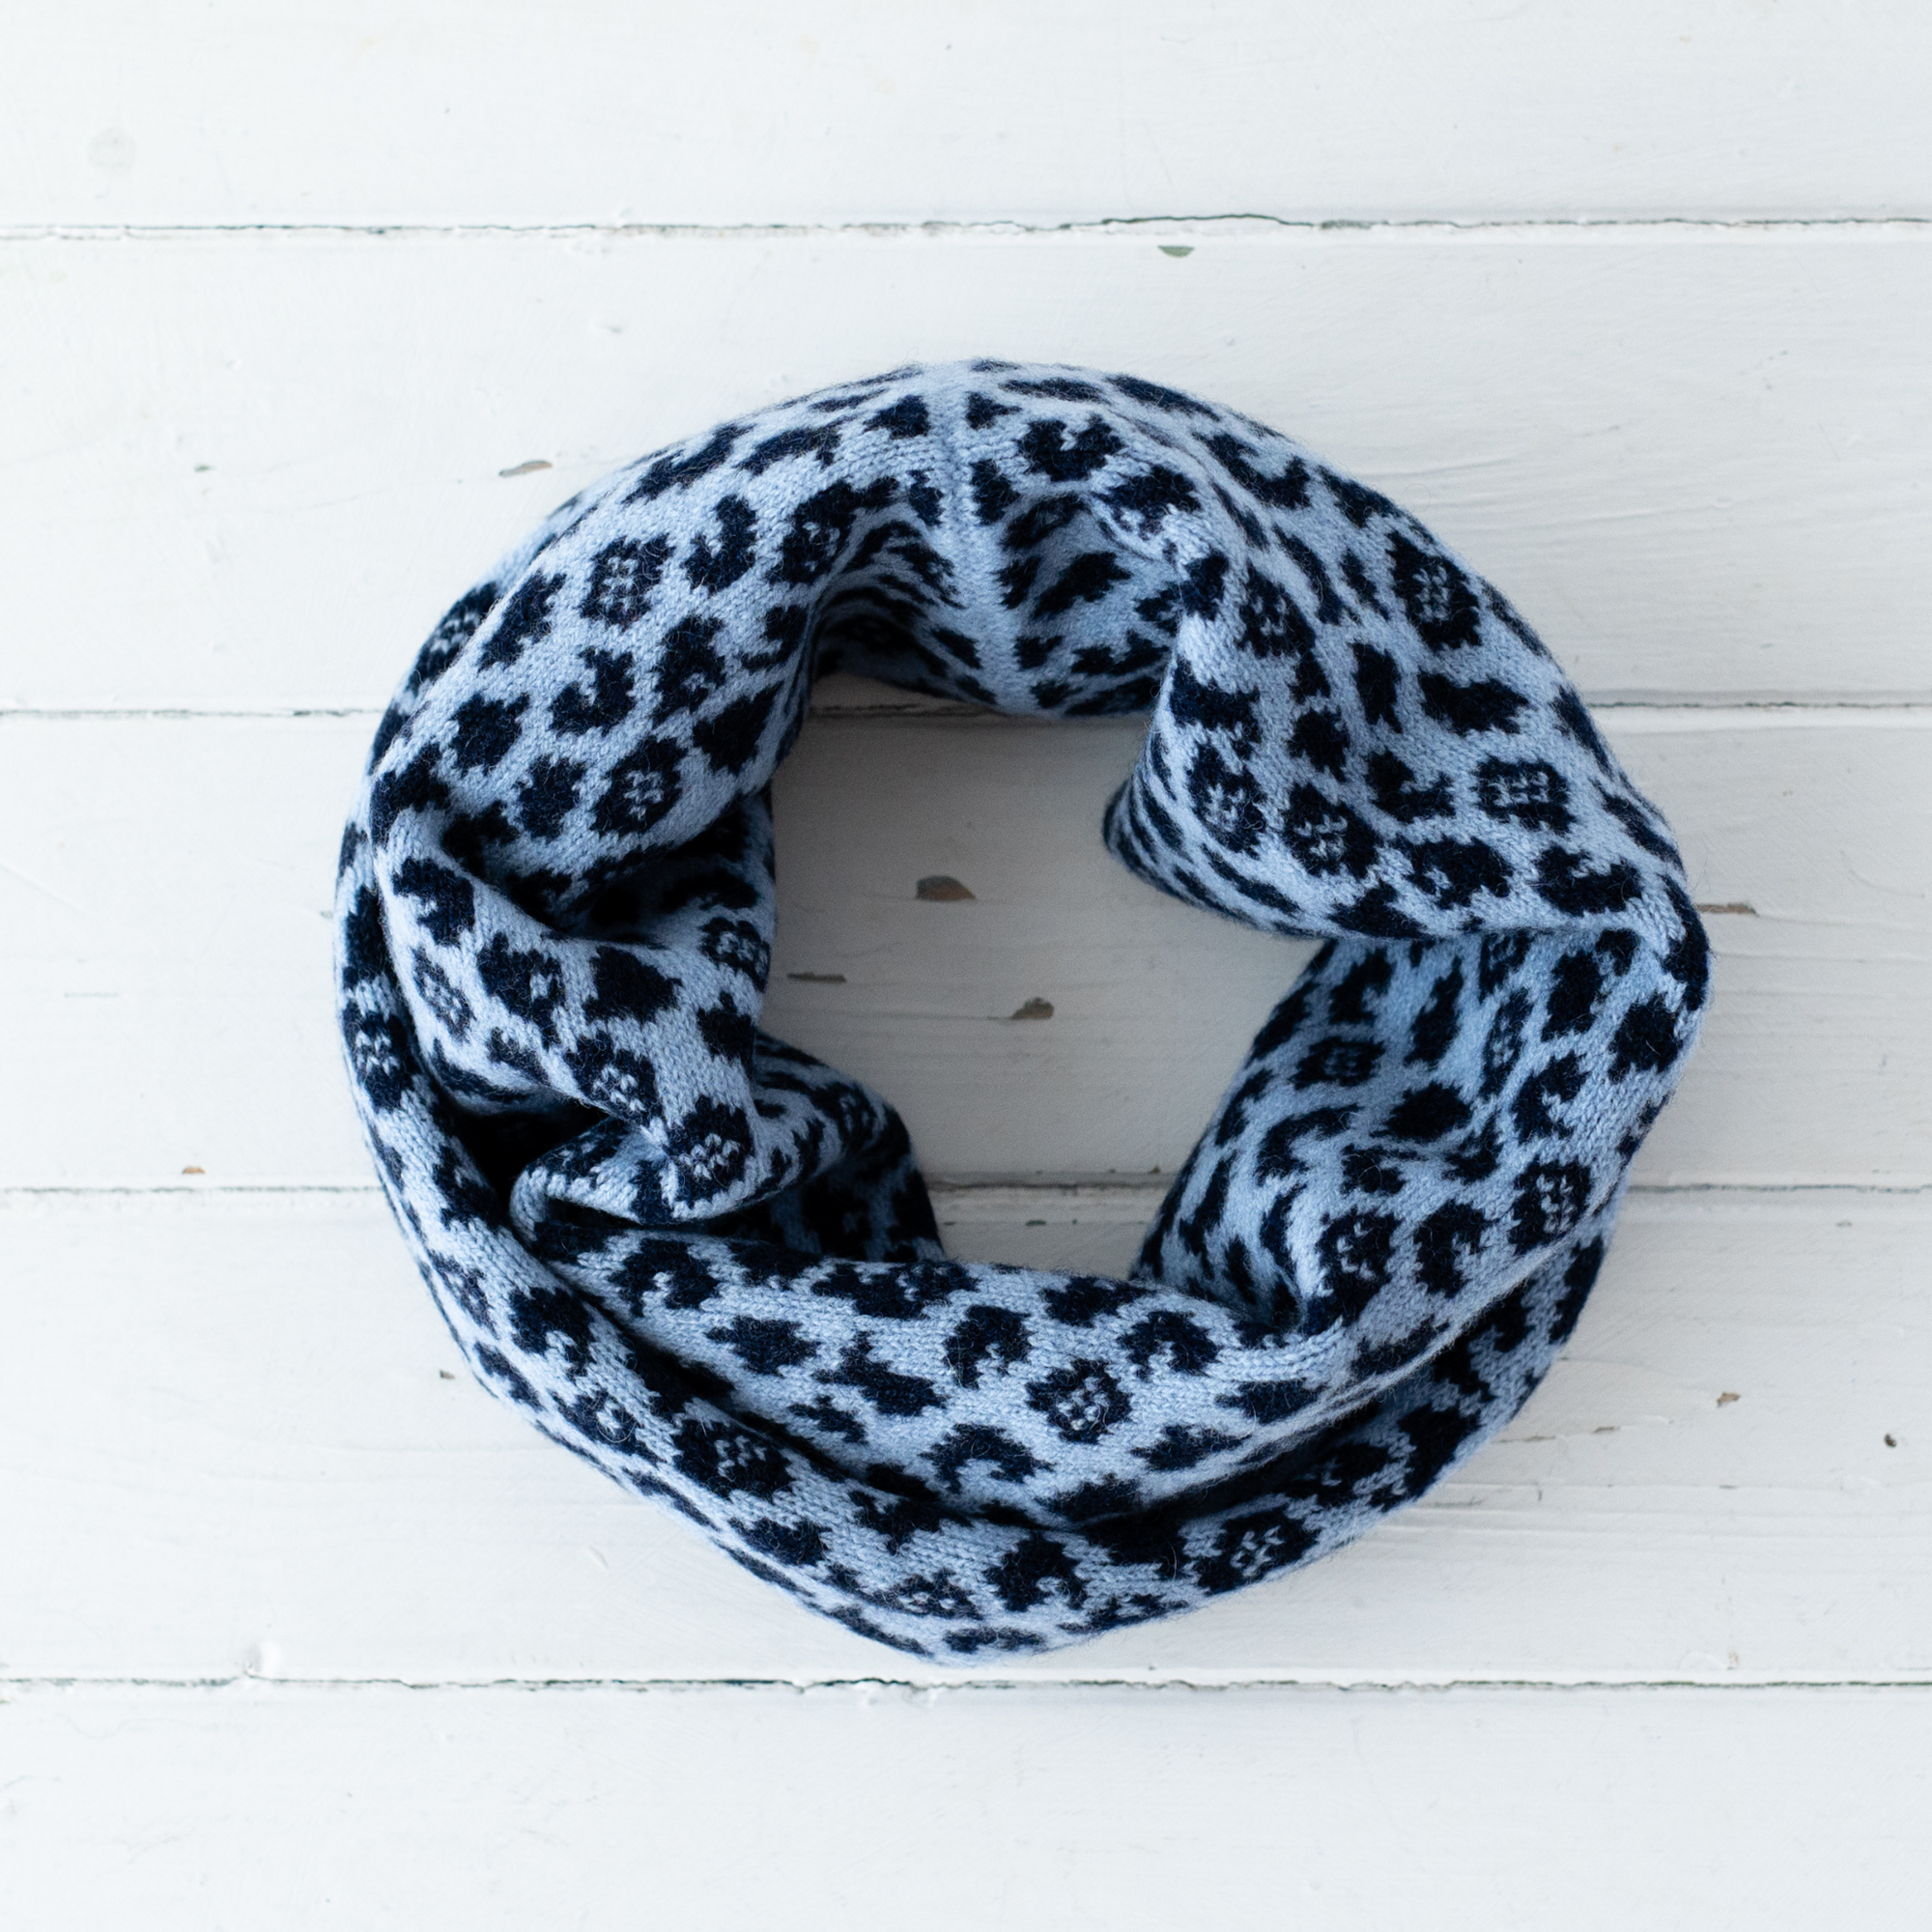 SAMPLE SALE Leopard cowl - light blue and navy